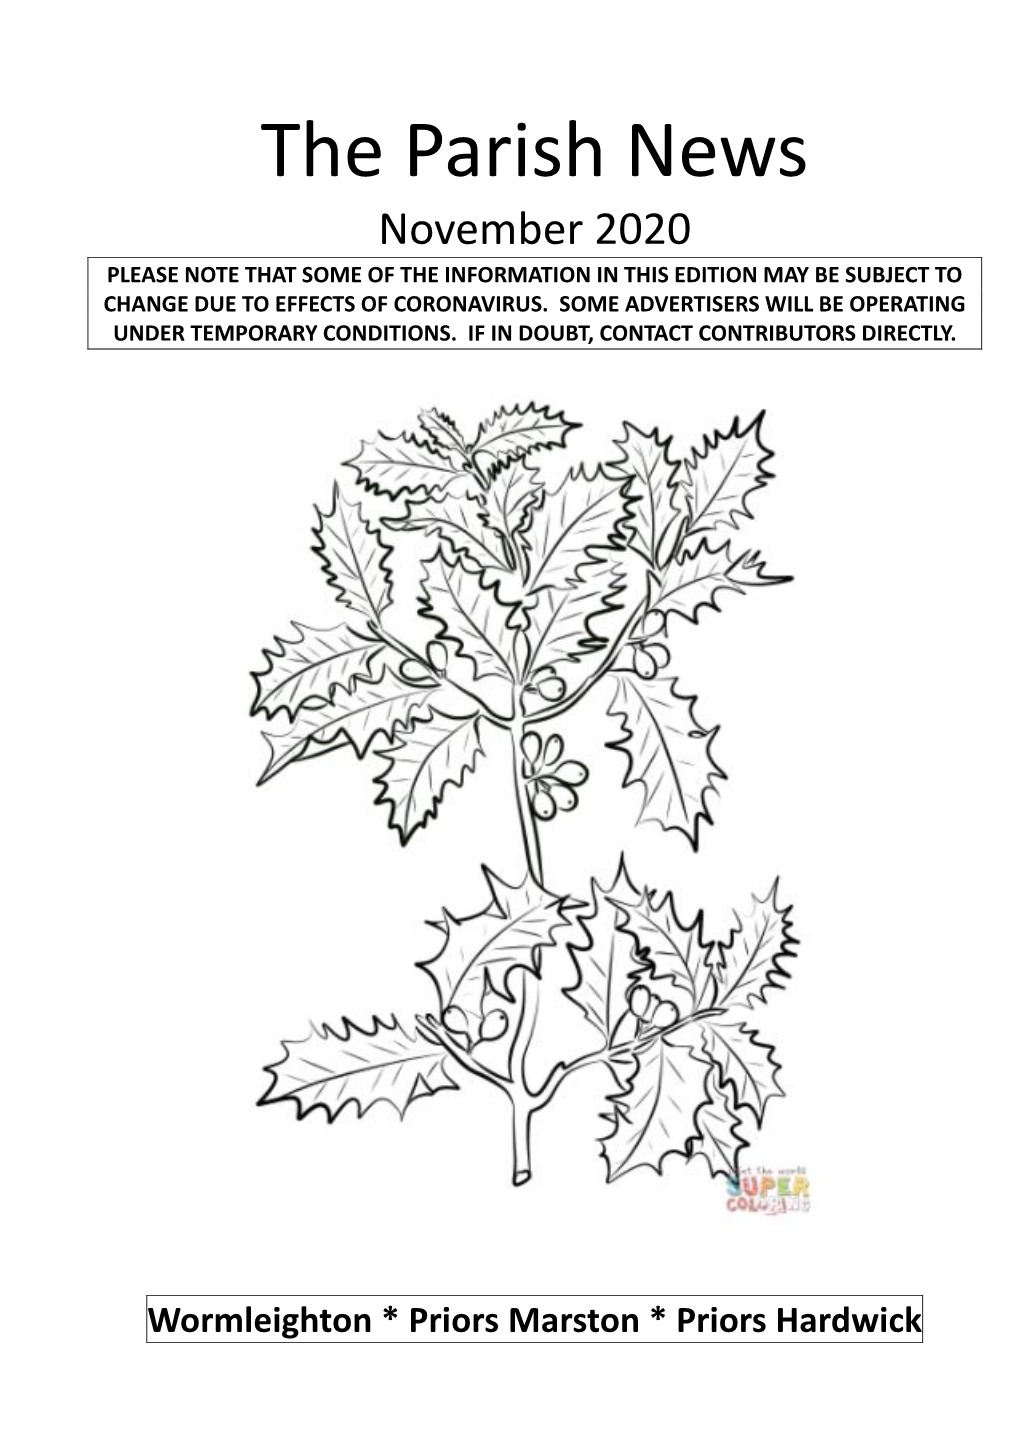 The Parish News November 2020 PLEASE NOTE THAT SOME of the INFORMATION in THIS EDITION MAY BE SUBJECT to CHANGE DUE to EFFECTS of CORONAVIRUS